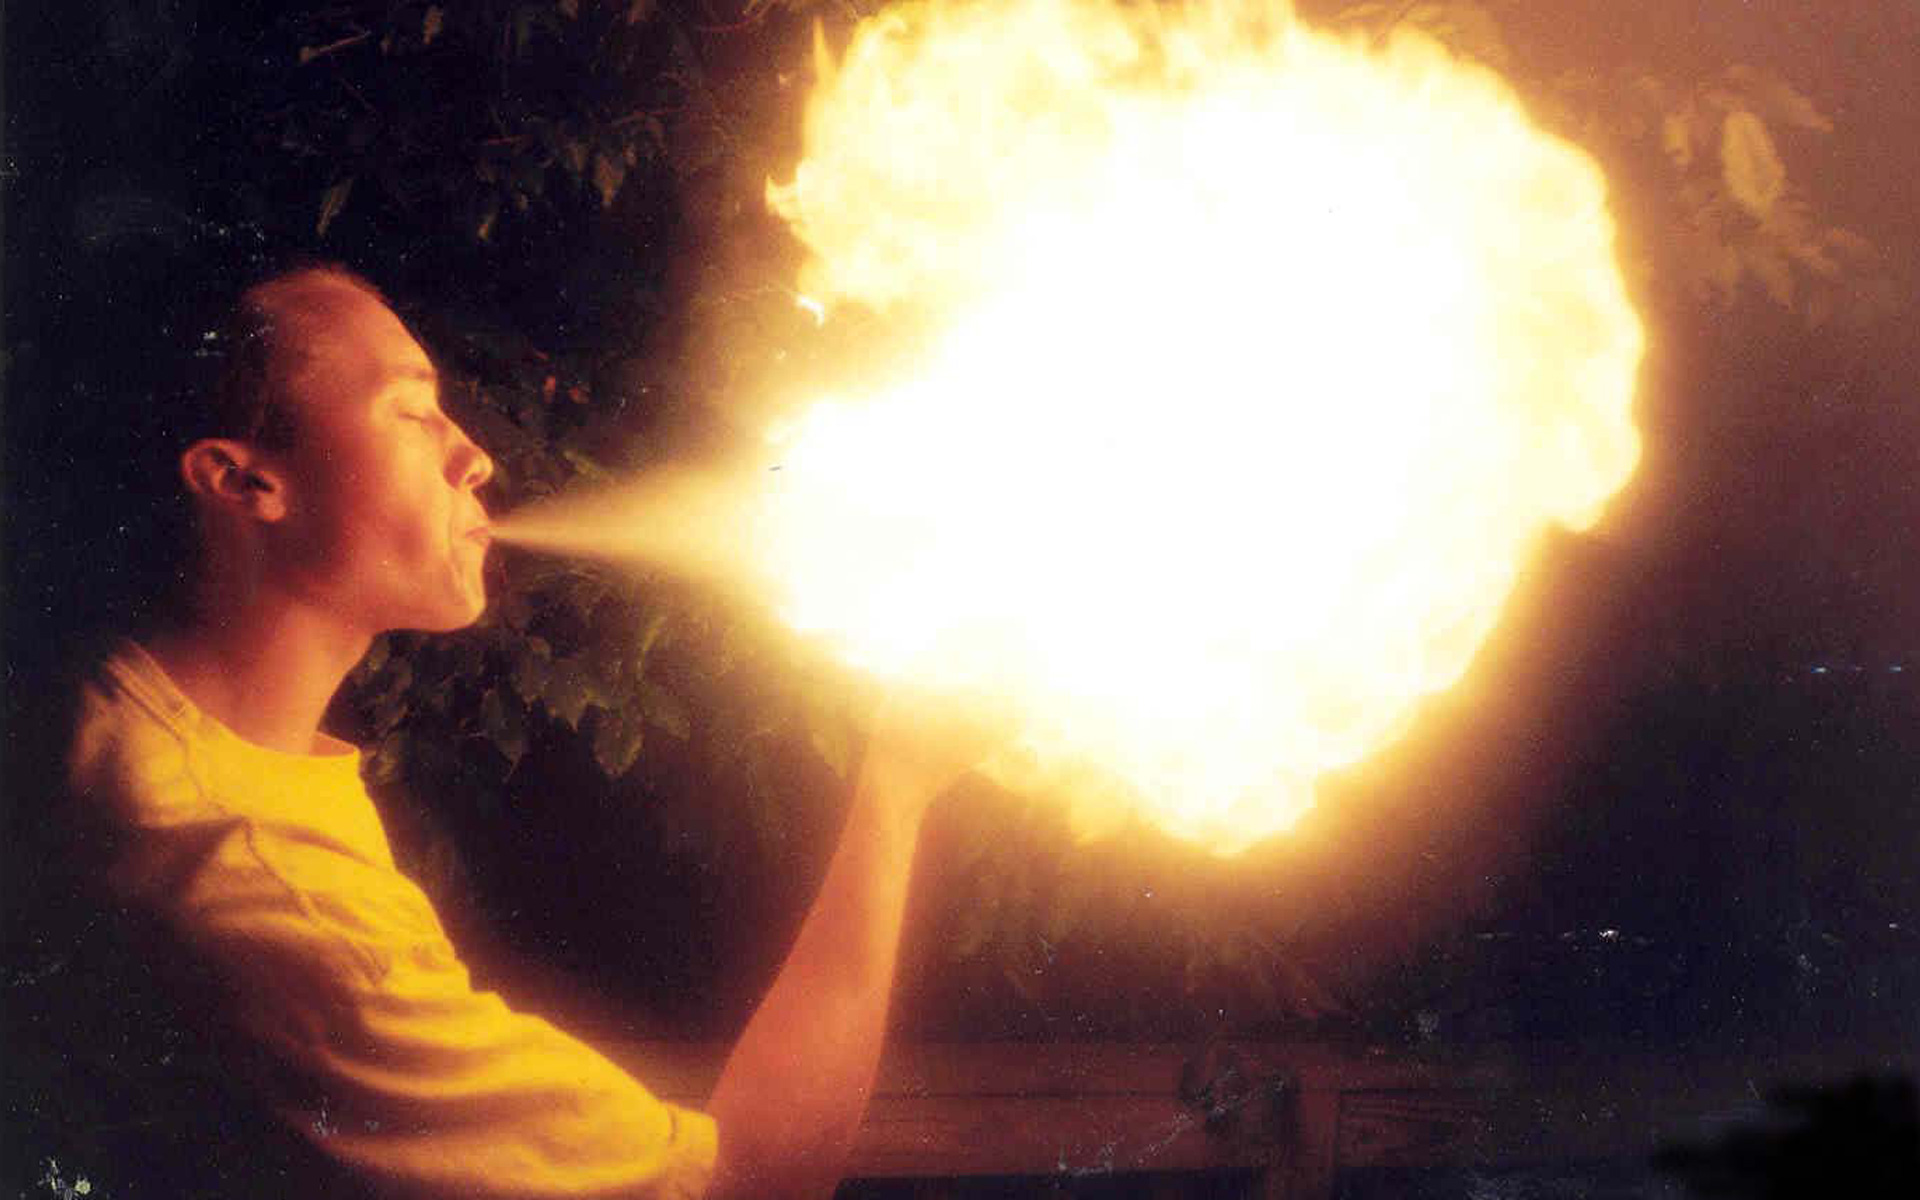 Photo of me blowing fire in college.